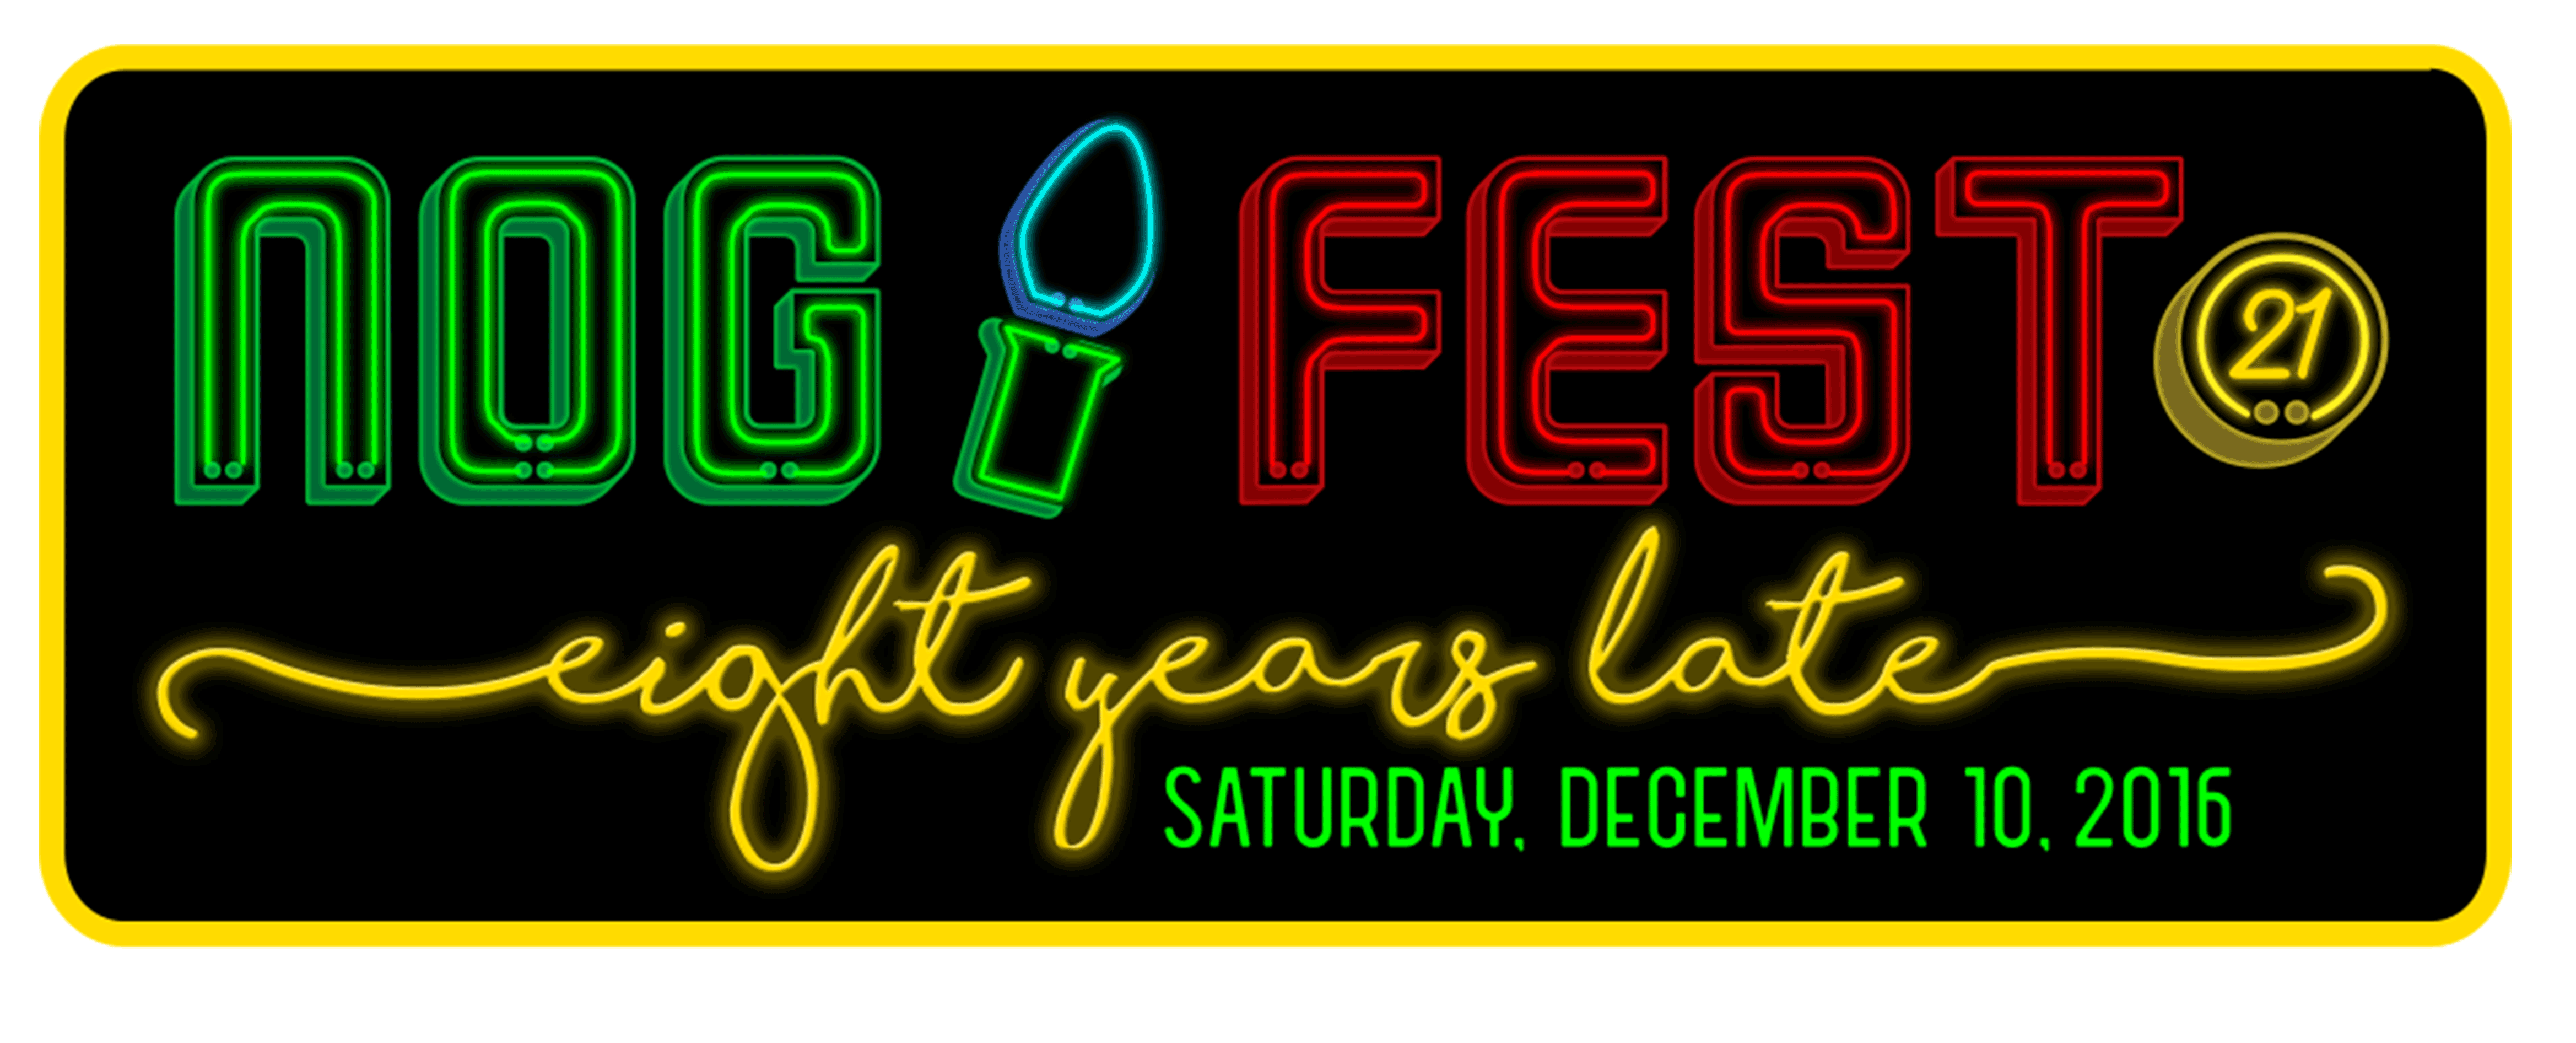 Nog Fest 21... 8 years late